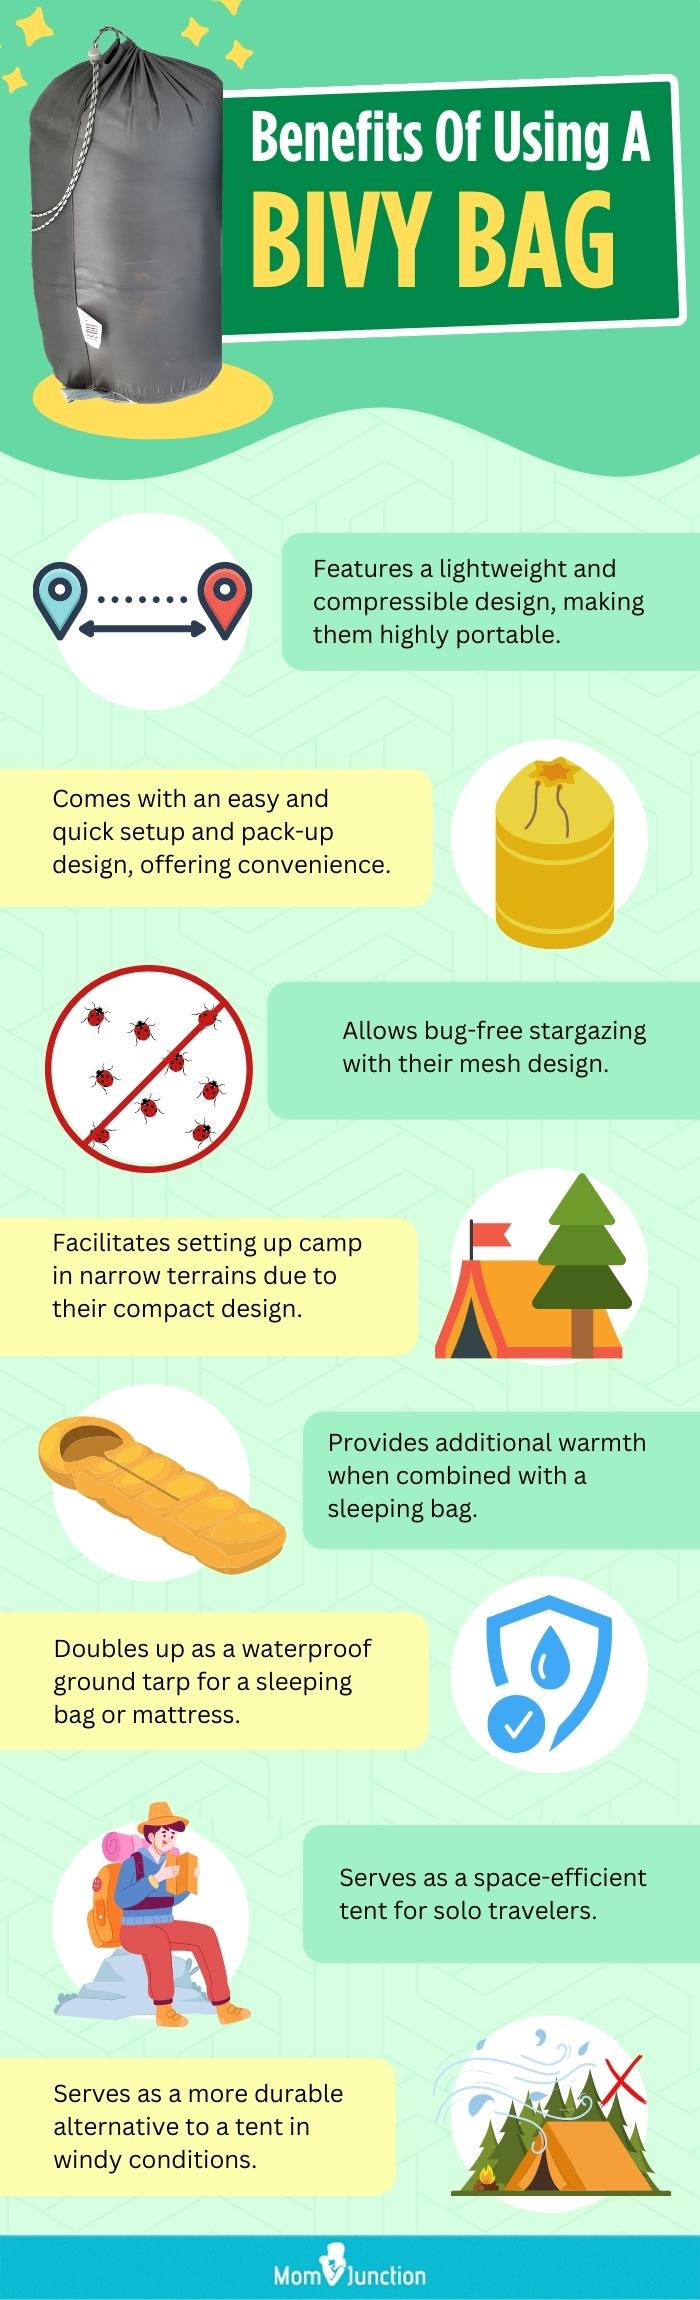 Benefits Of Using A Bivy Bag (infographic)